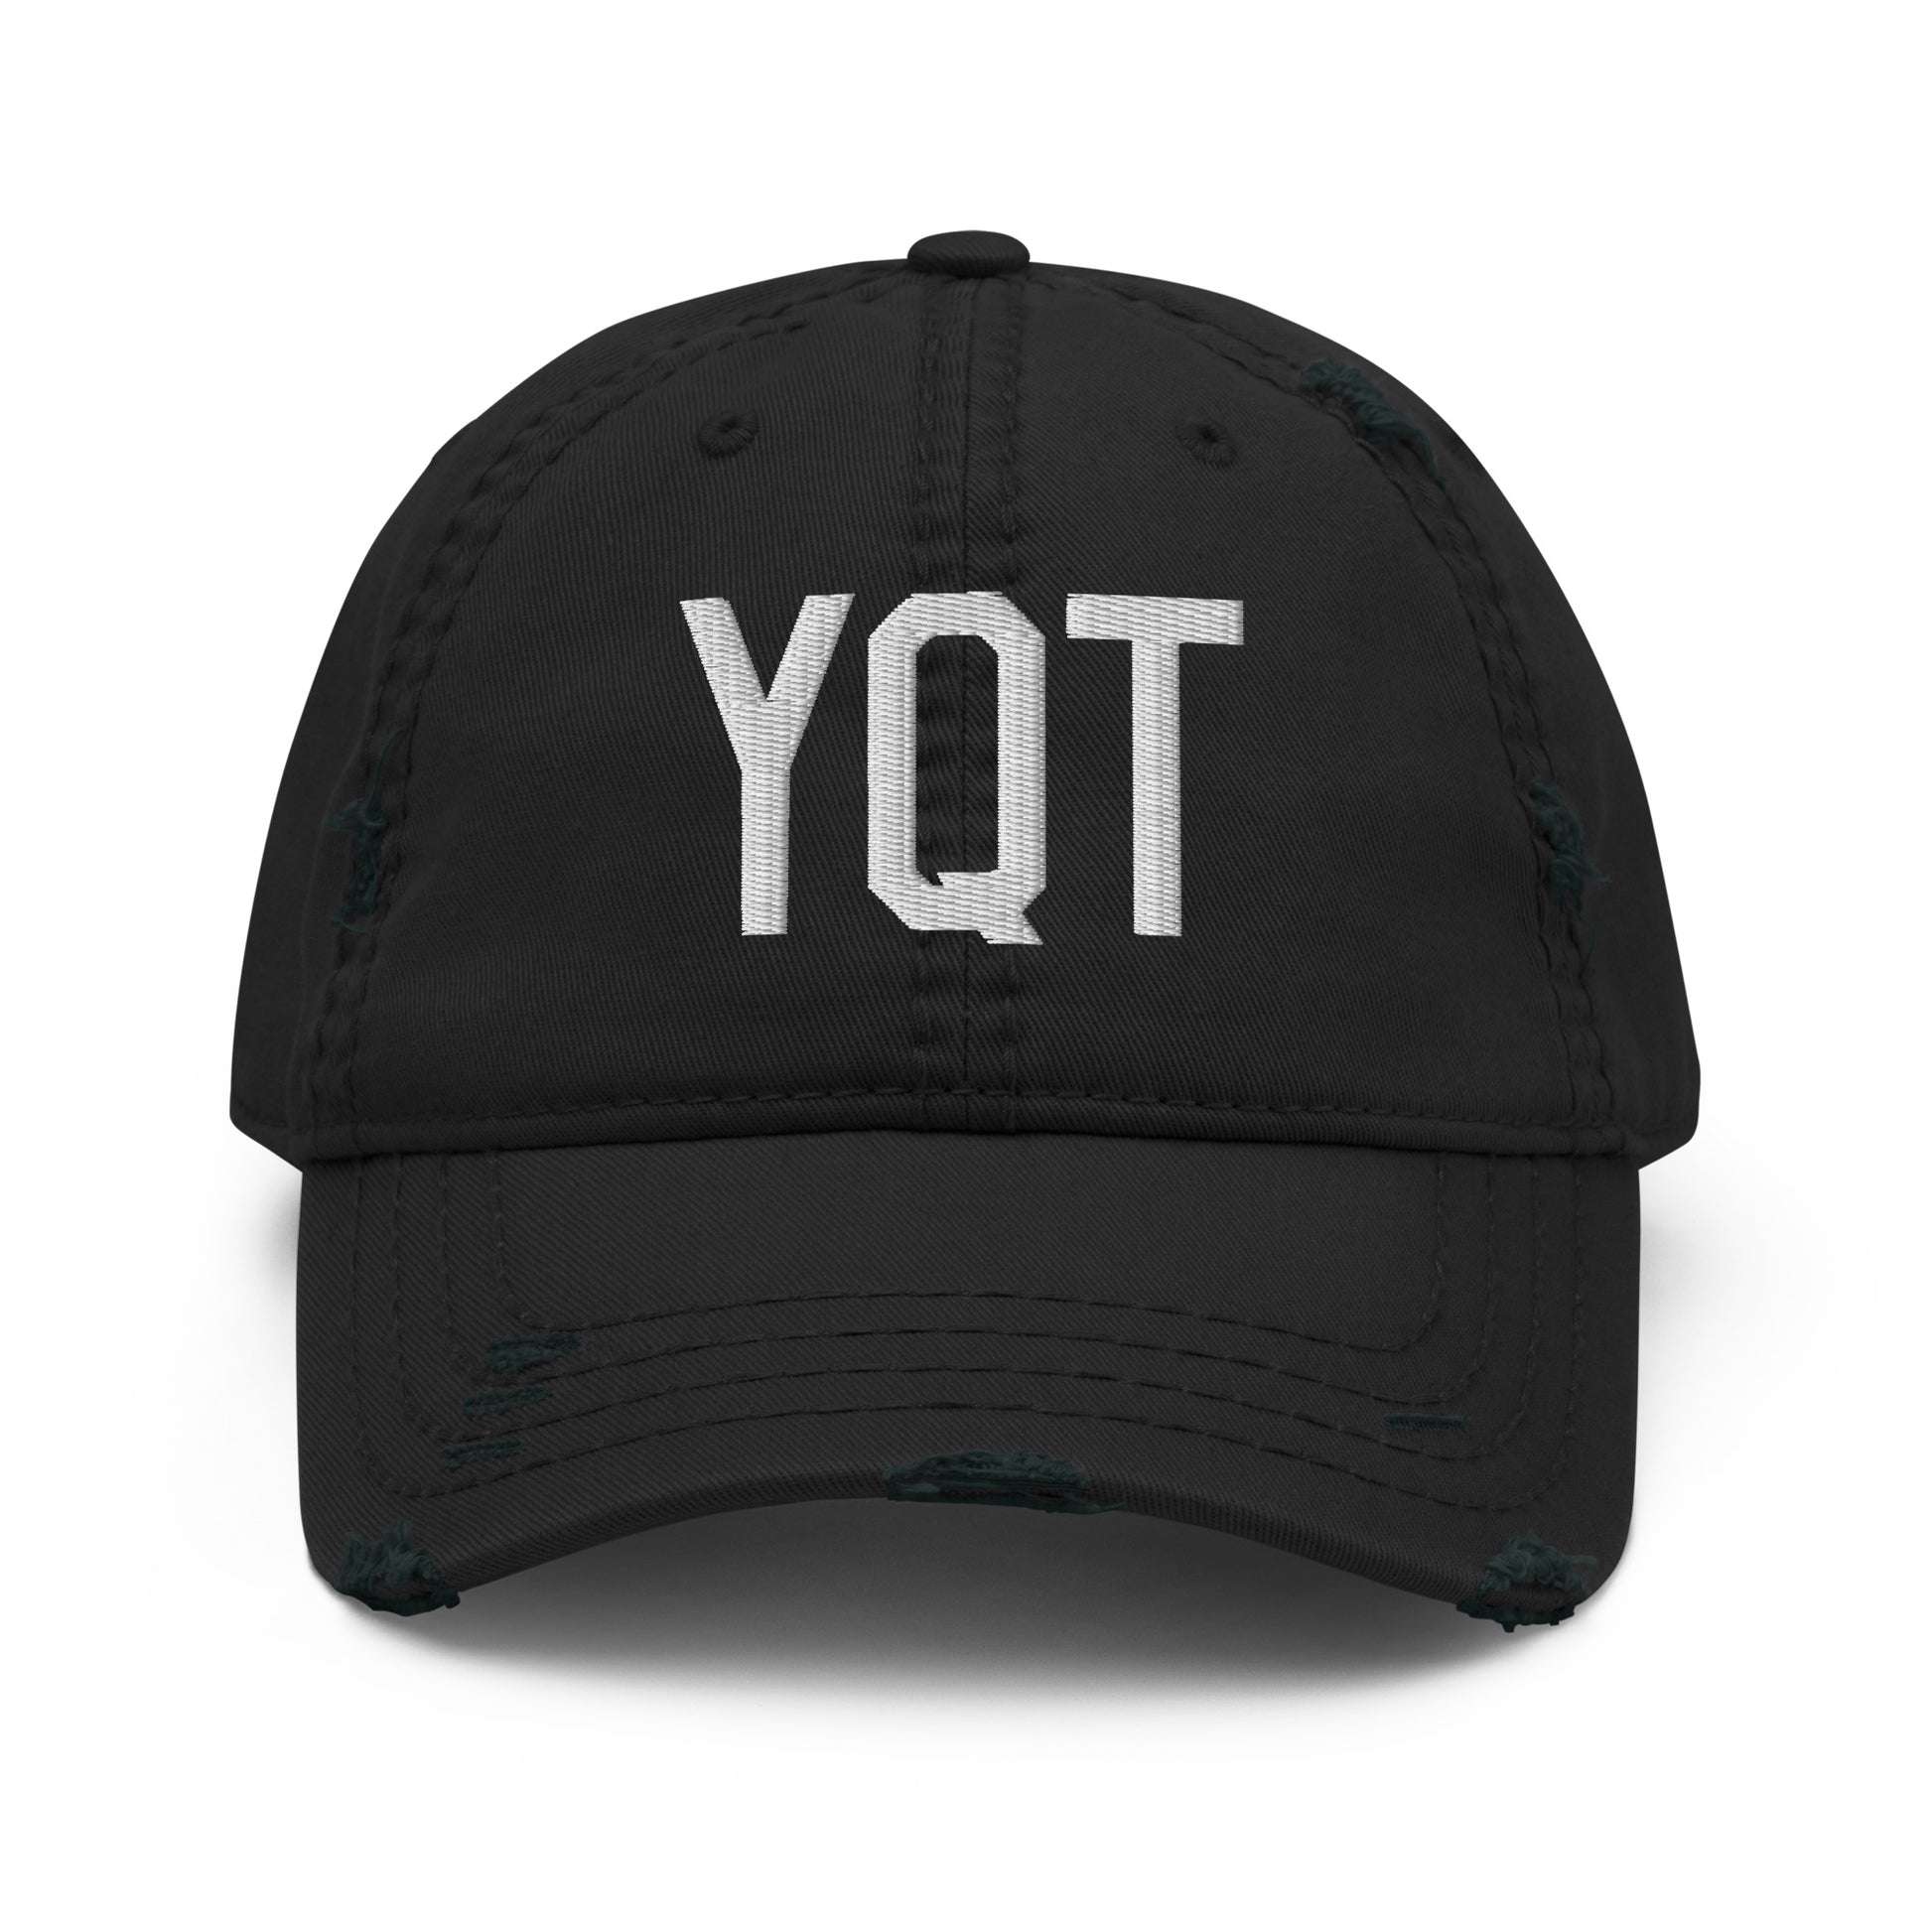 Airport Code Distressed Hat - White • YQT Thunder Bay • YHM Designs - Image 10